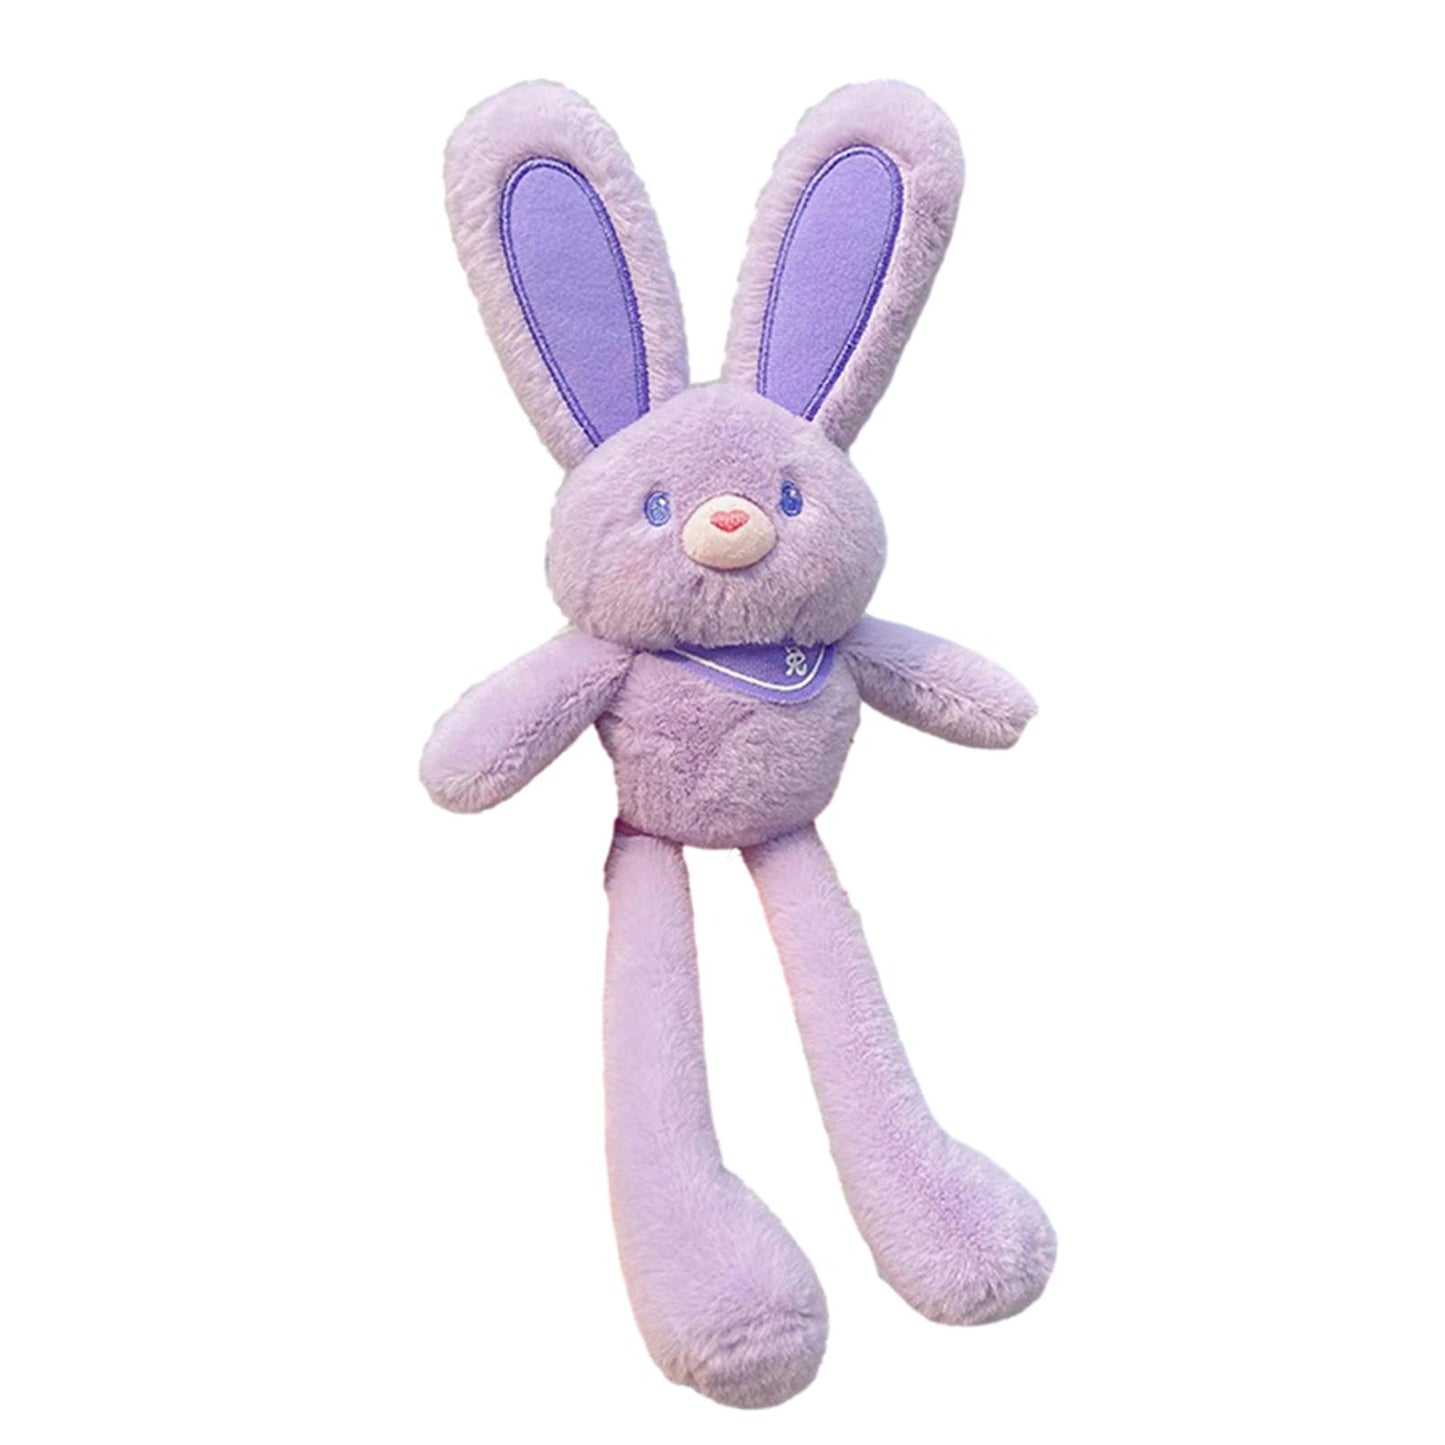 The Cutest Stuffed Bunny Toy With Pull Up Ears